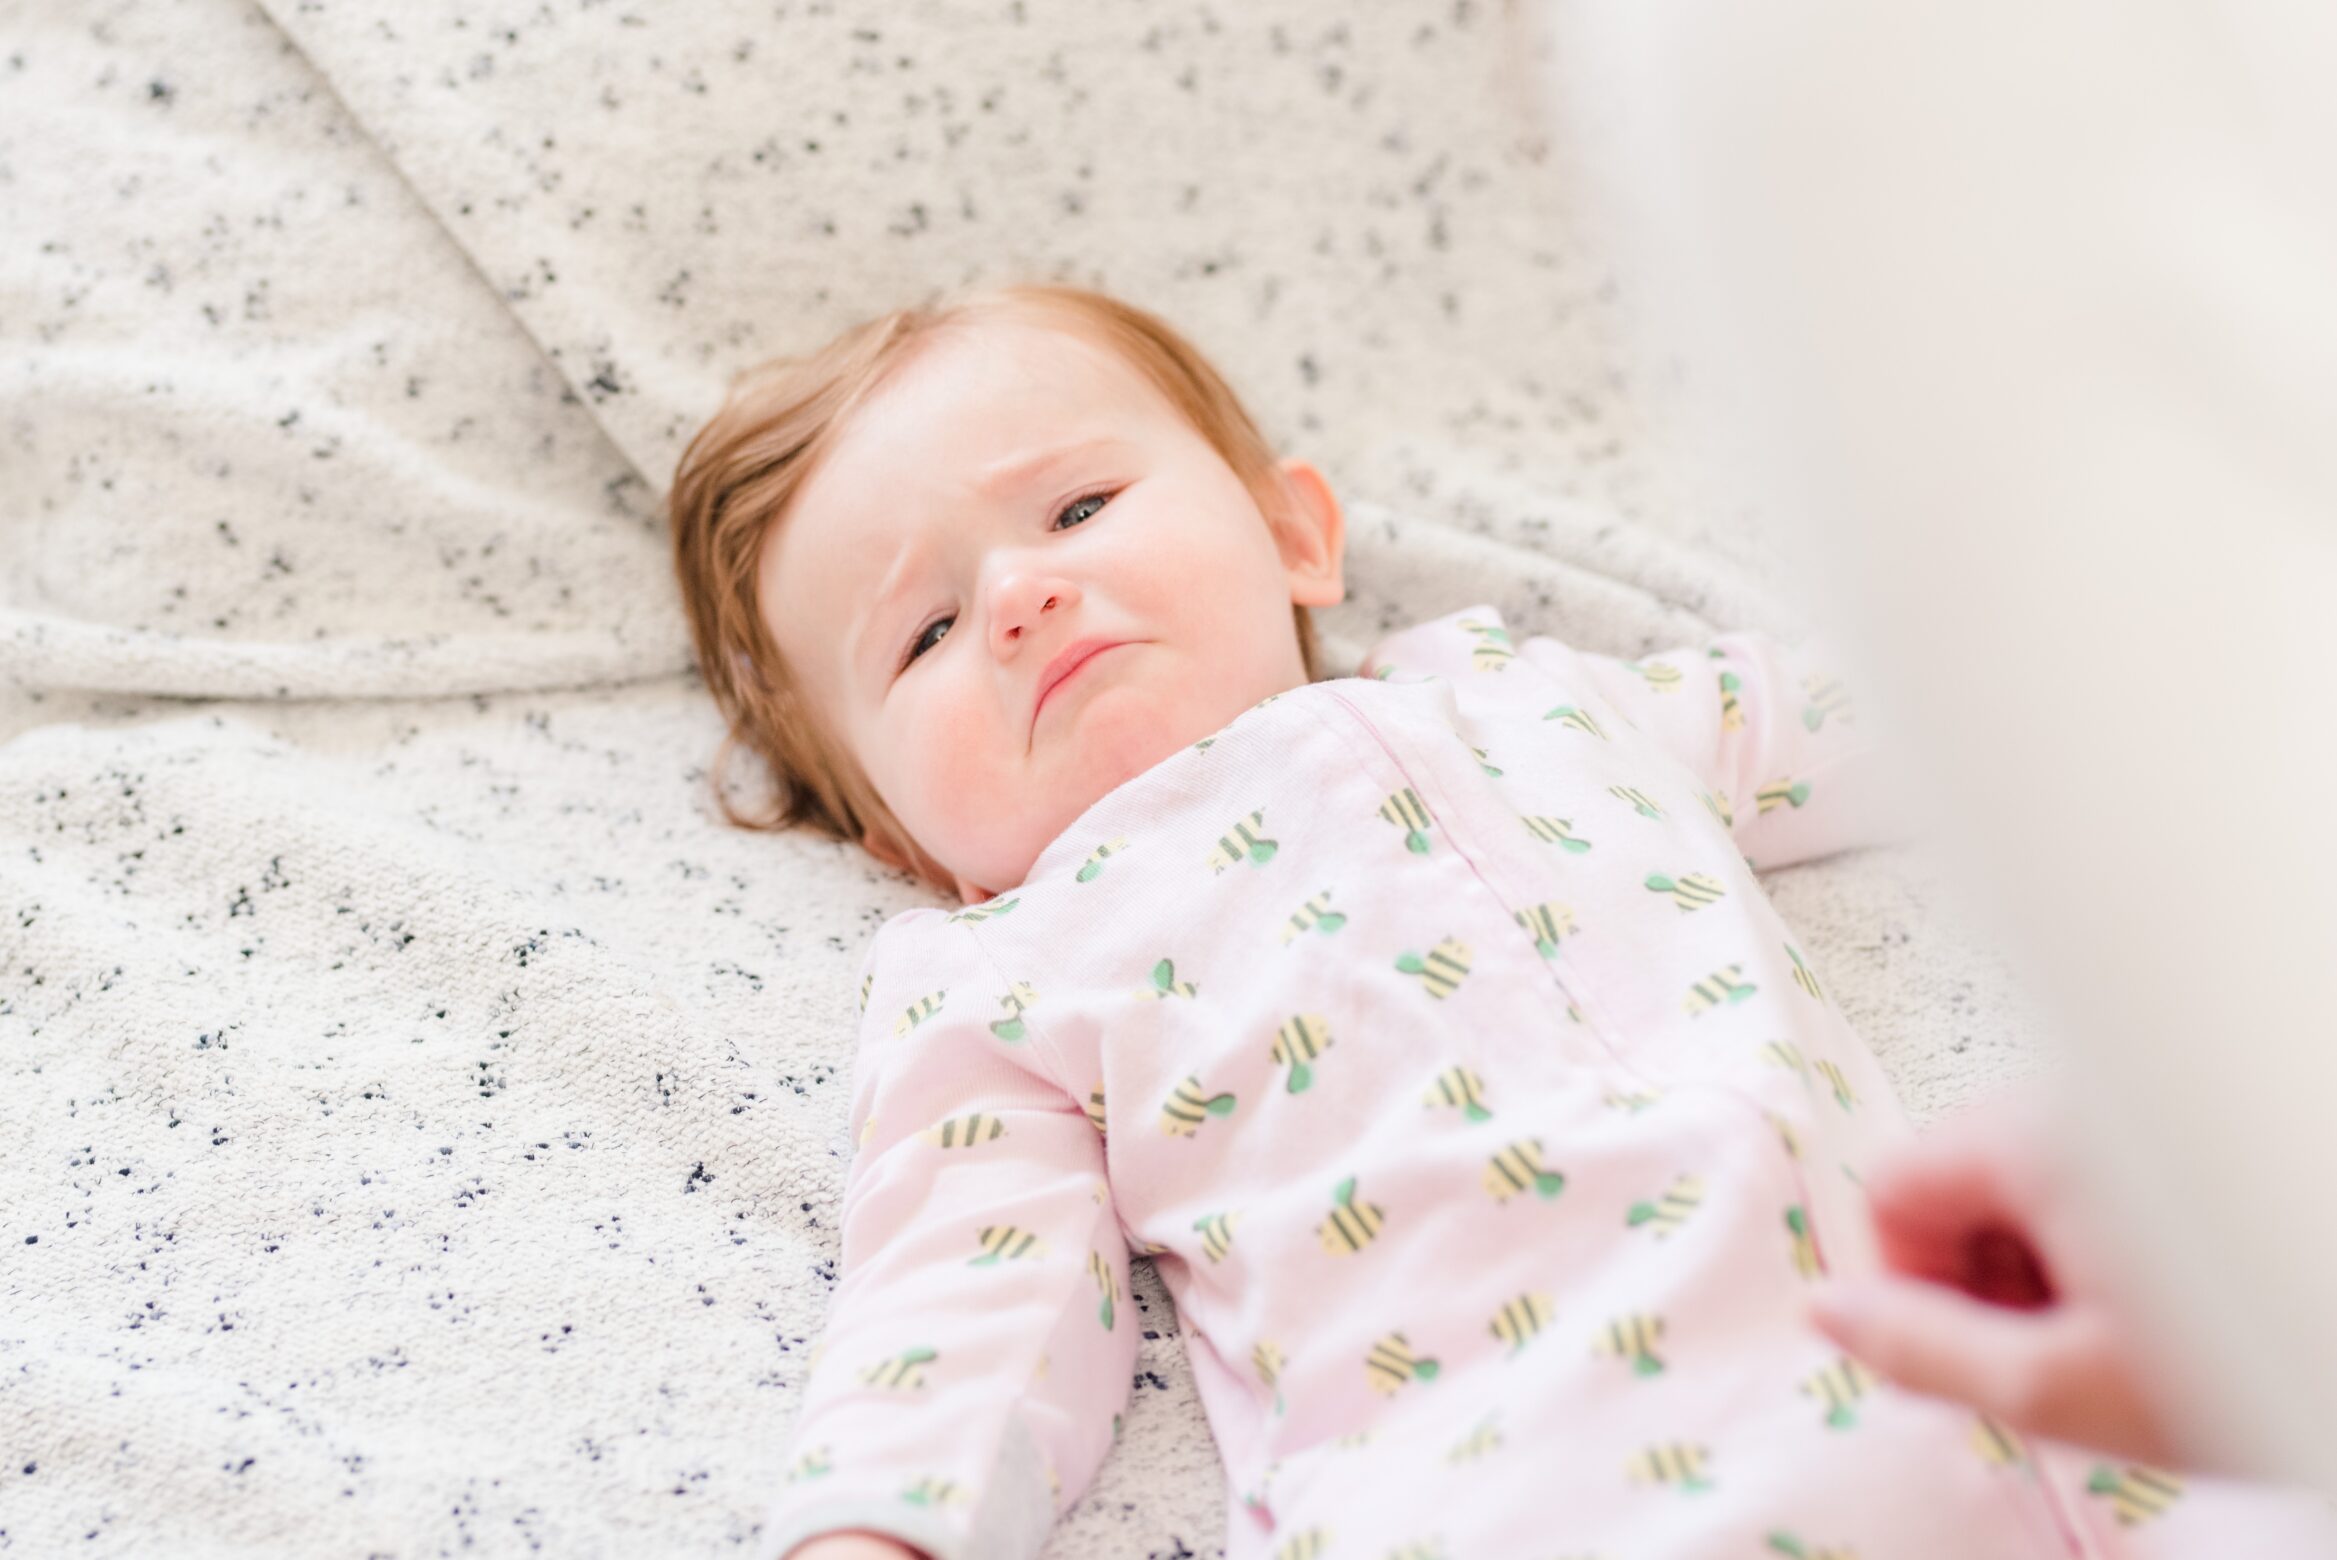 The Real Reasons You Aren’t Making Progress With Your Child’s Sleep